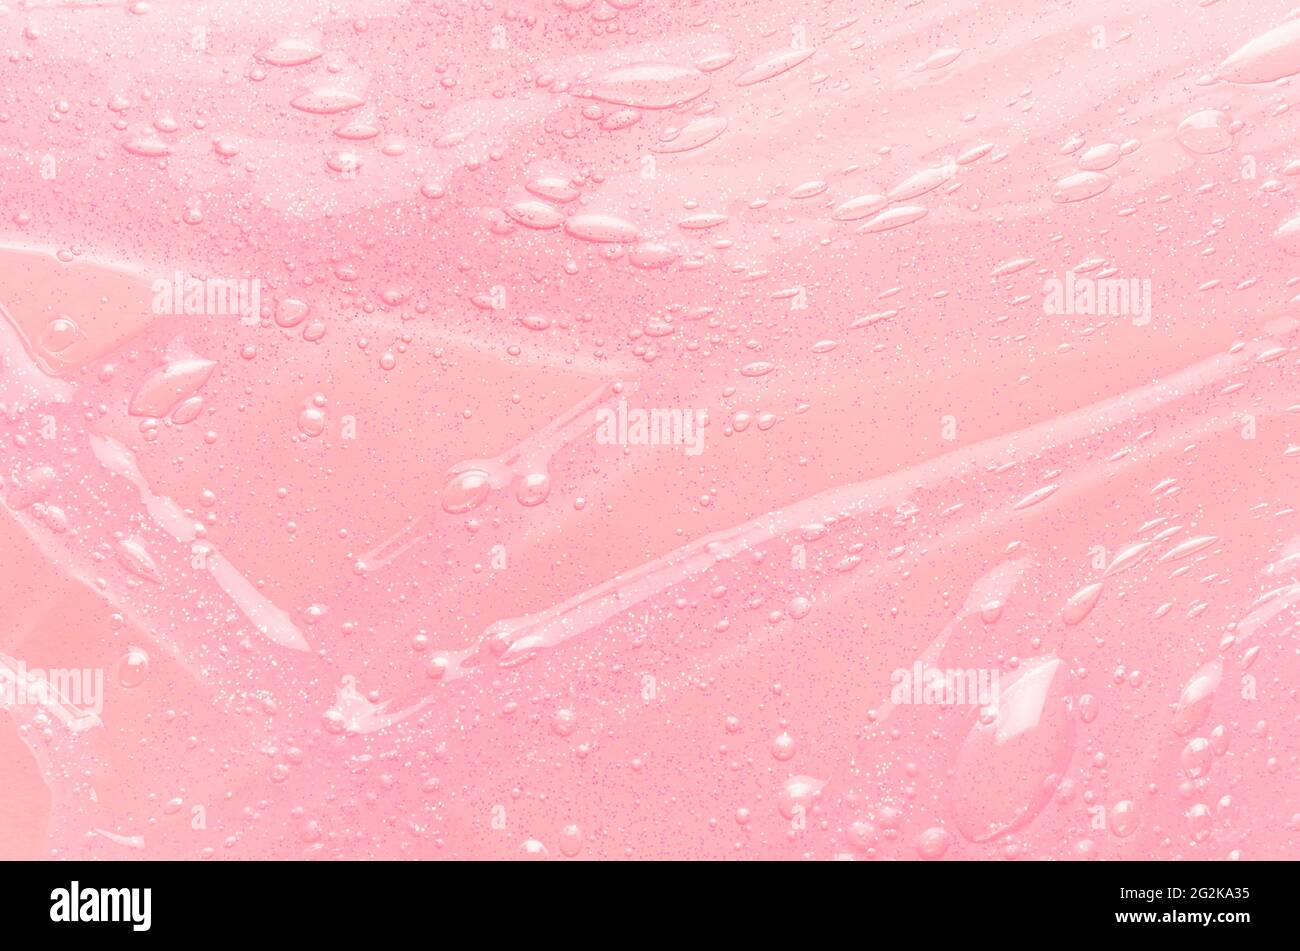 Liquid pink slime background with bubbles and highlights Stock Photo - Alamy